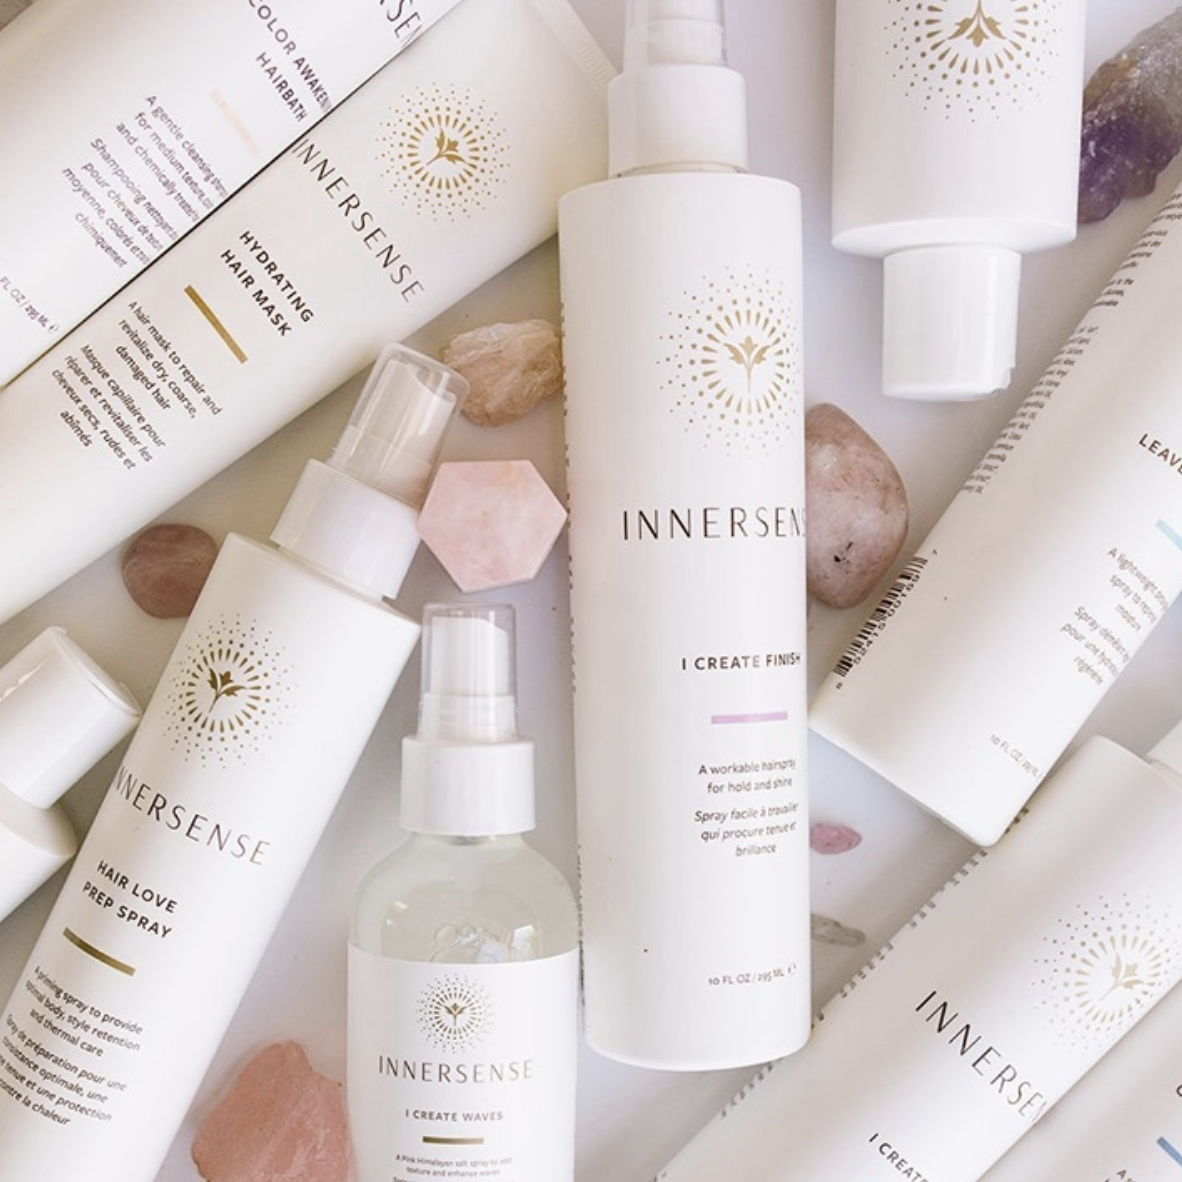 Top 5 Styling Products from Innersense Beauty – Socialite Beauty